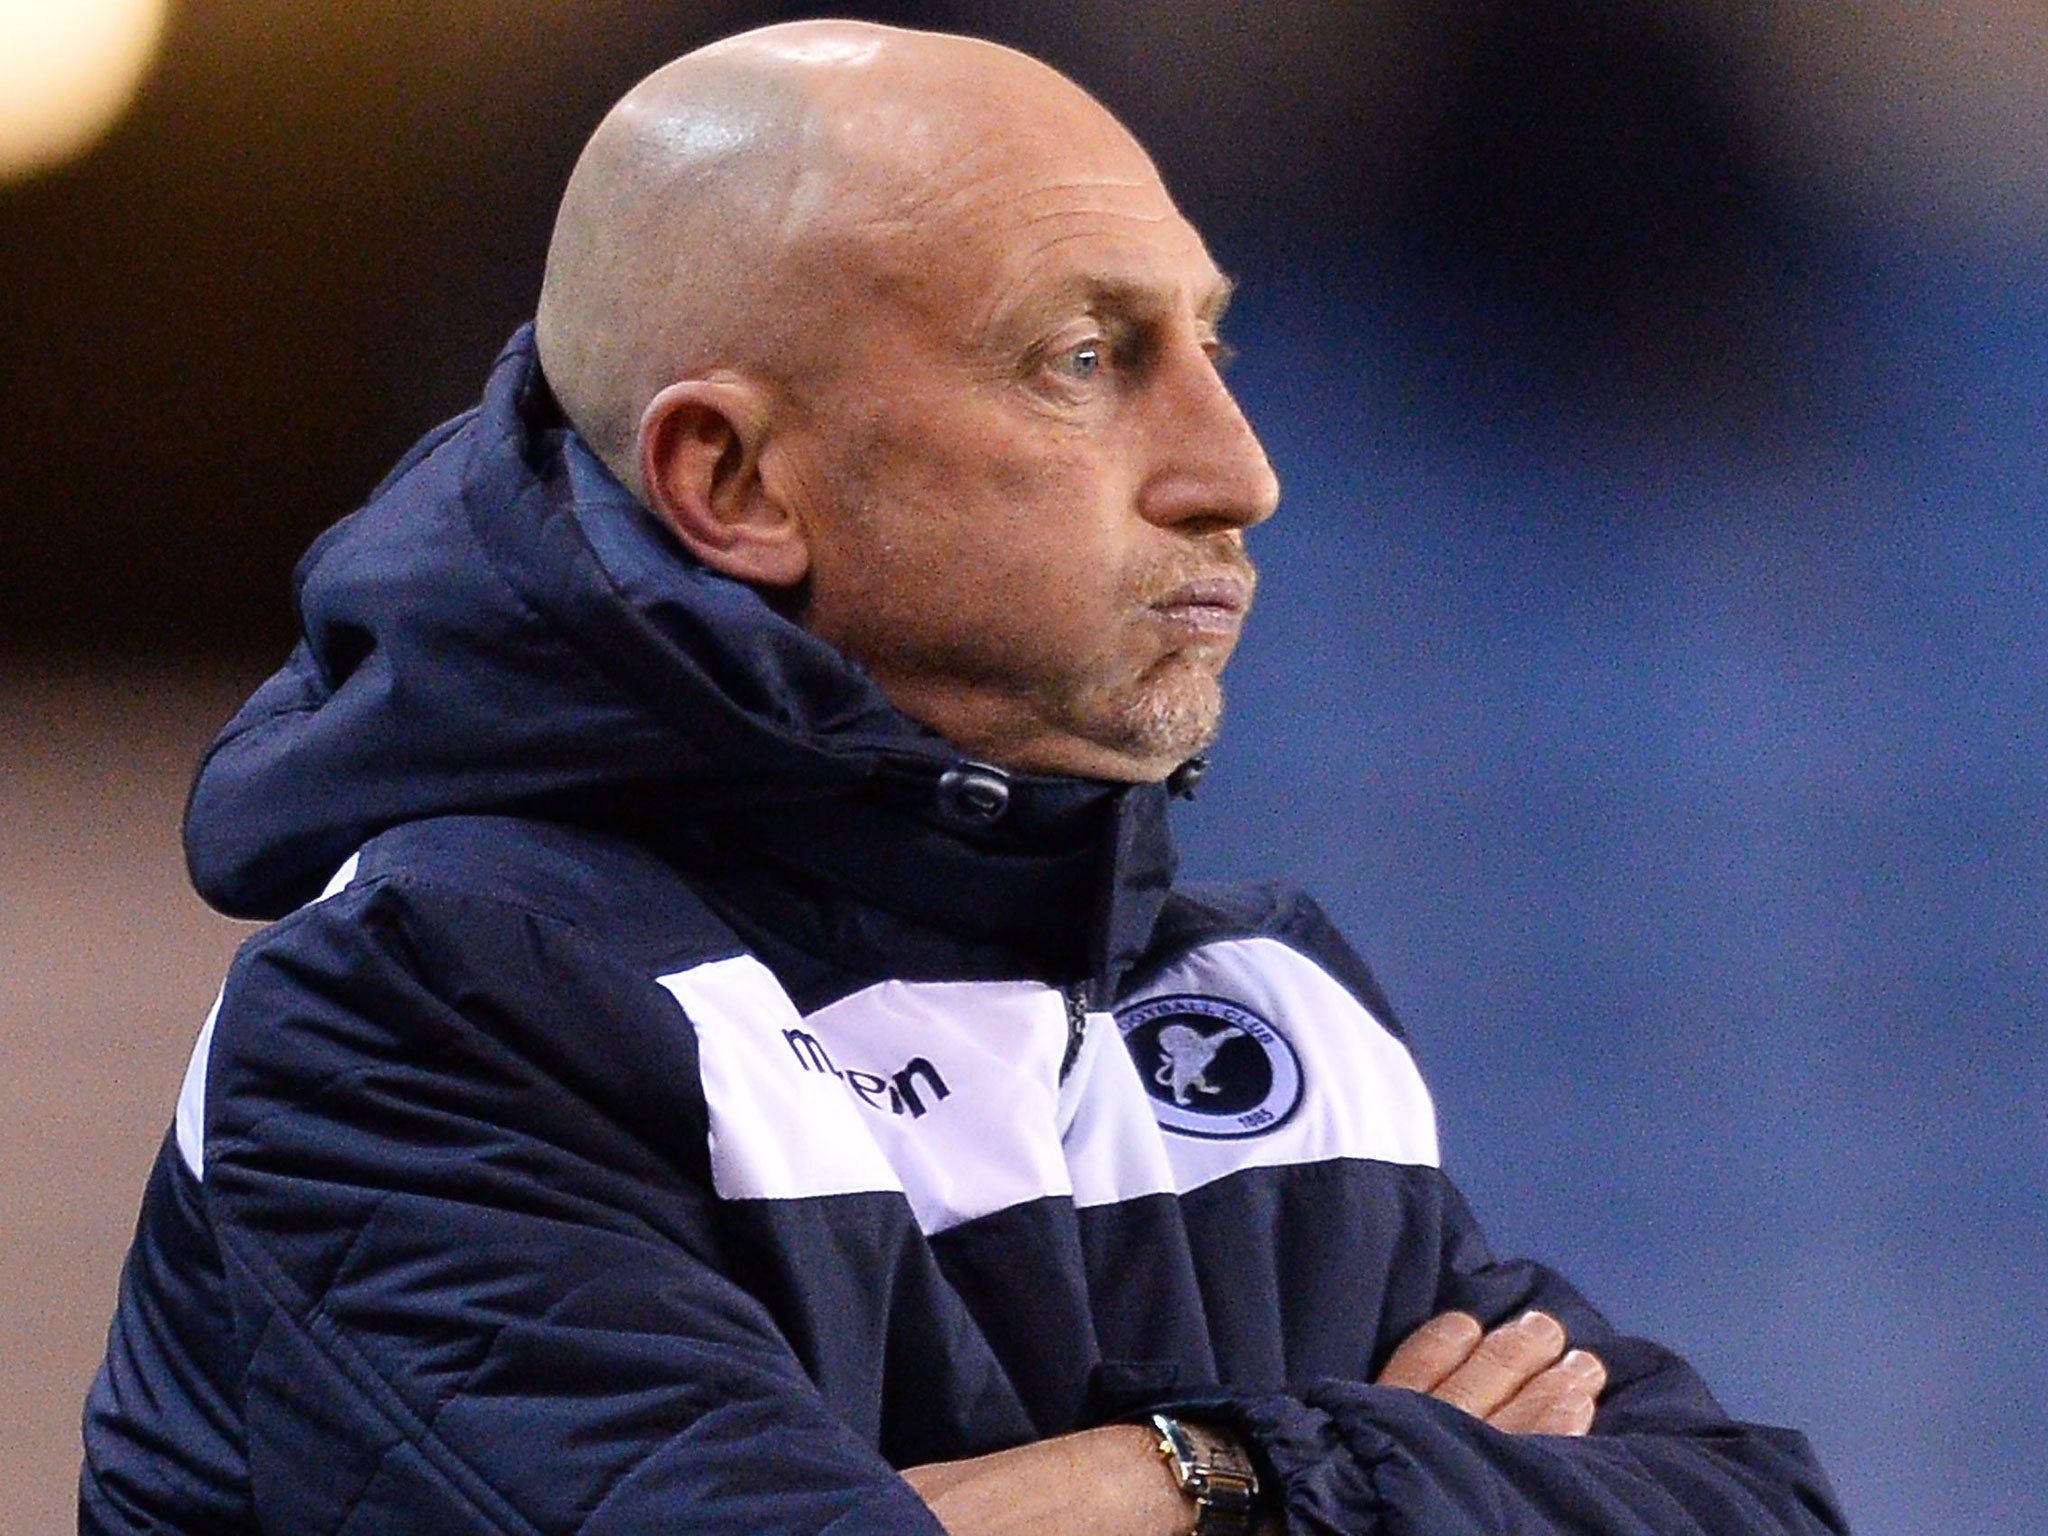 One of the more polite suggestions from Millwall fans to Ian Holloway was to 'call it a day now'